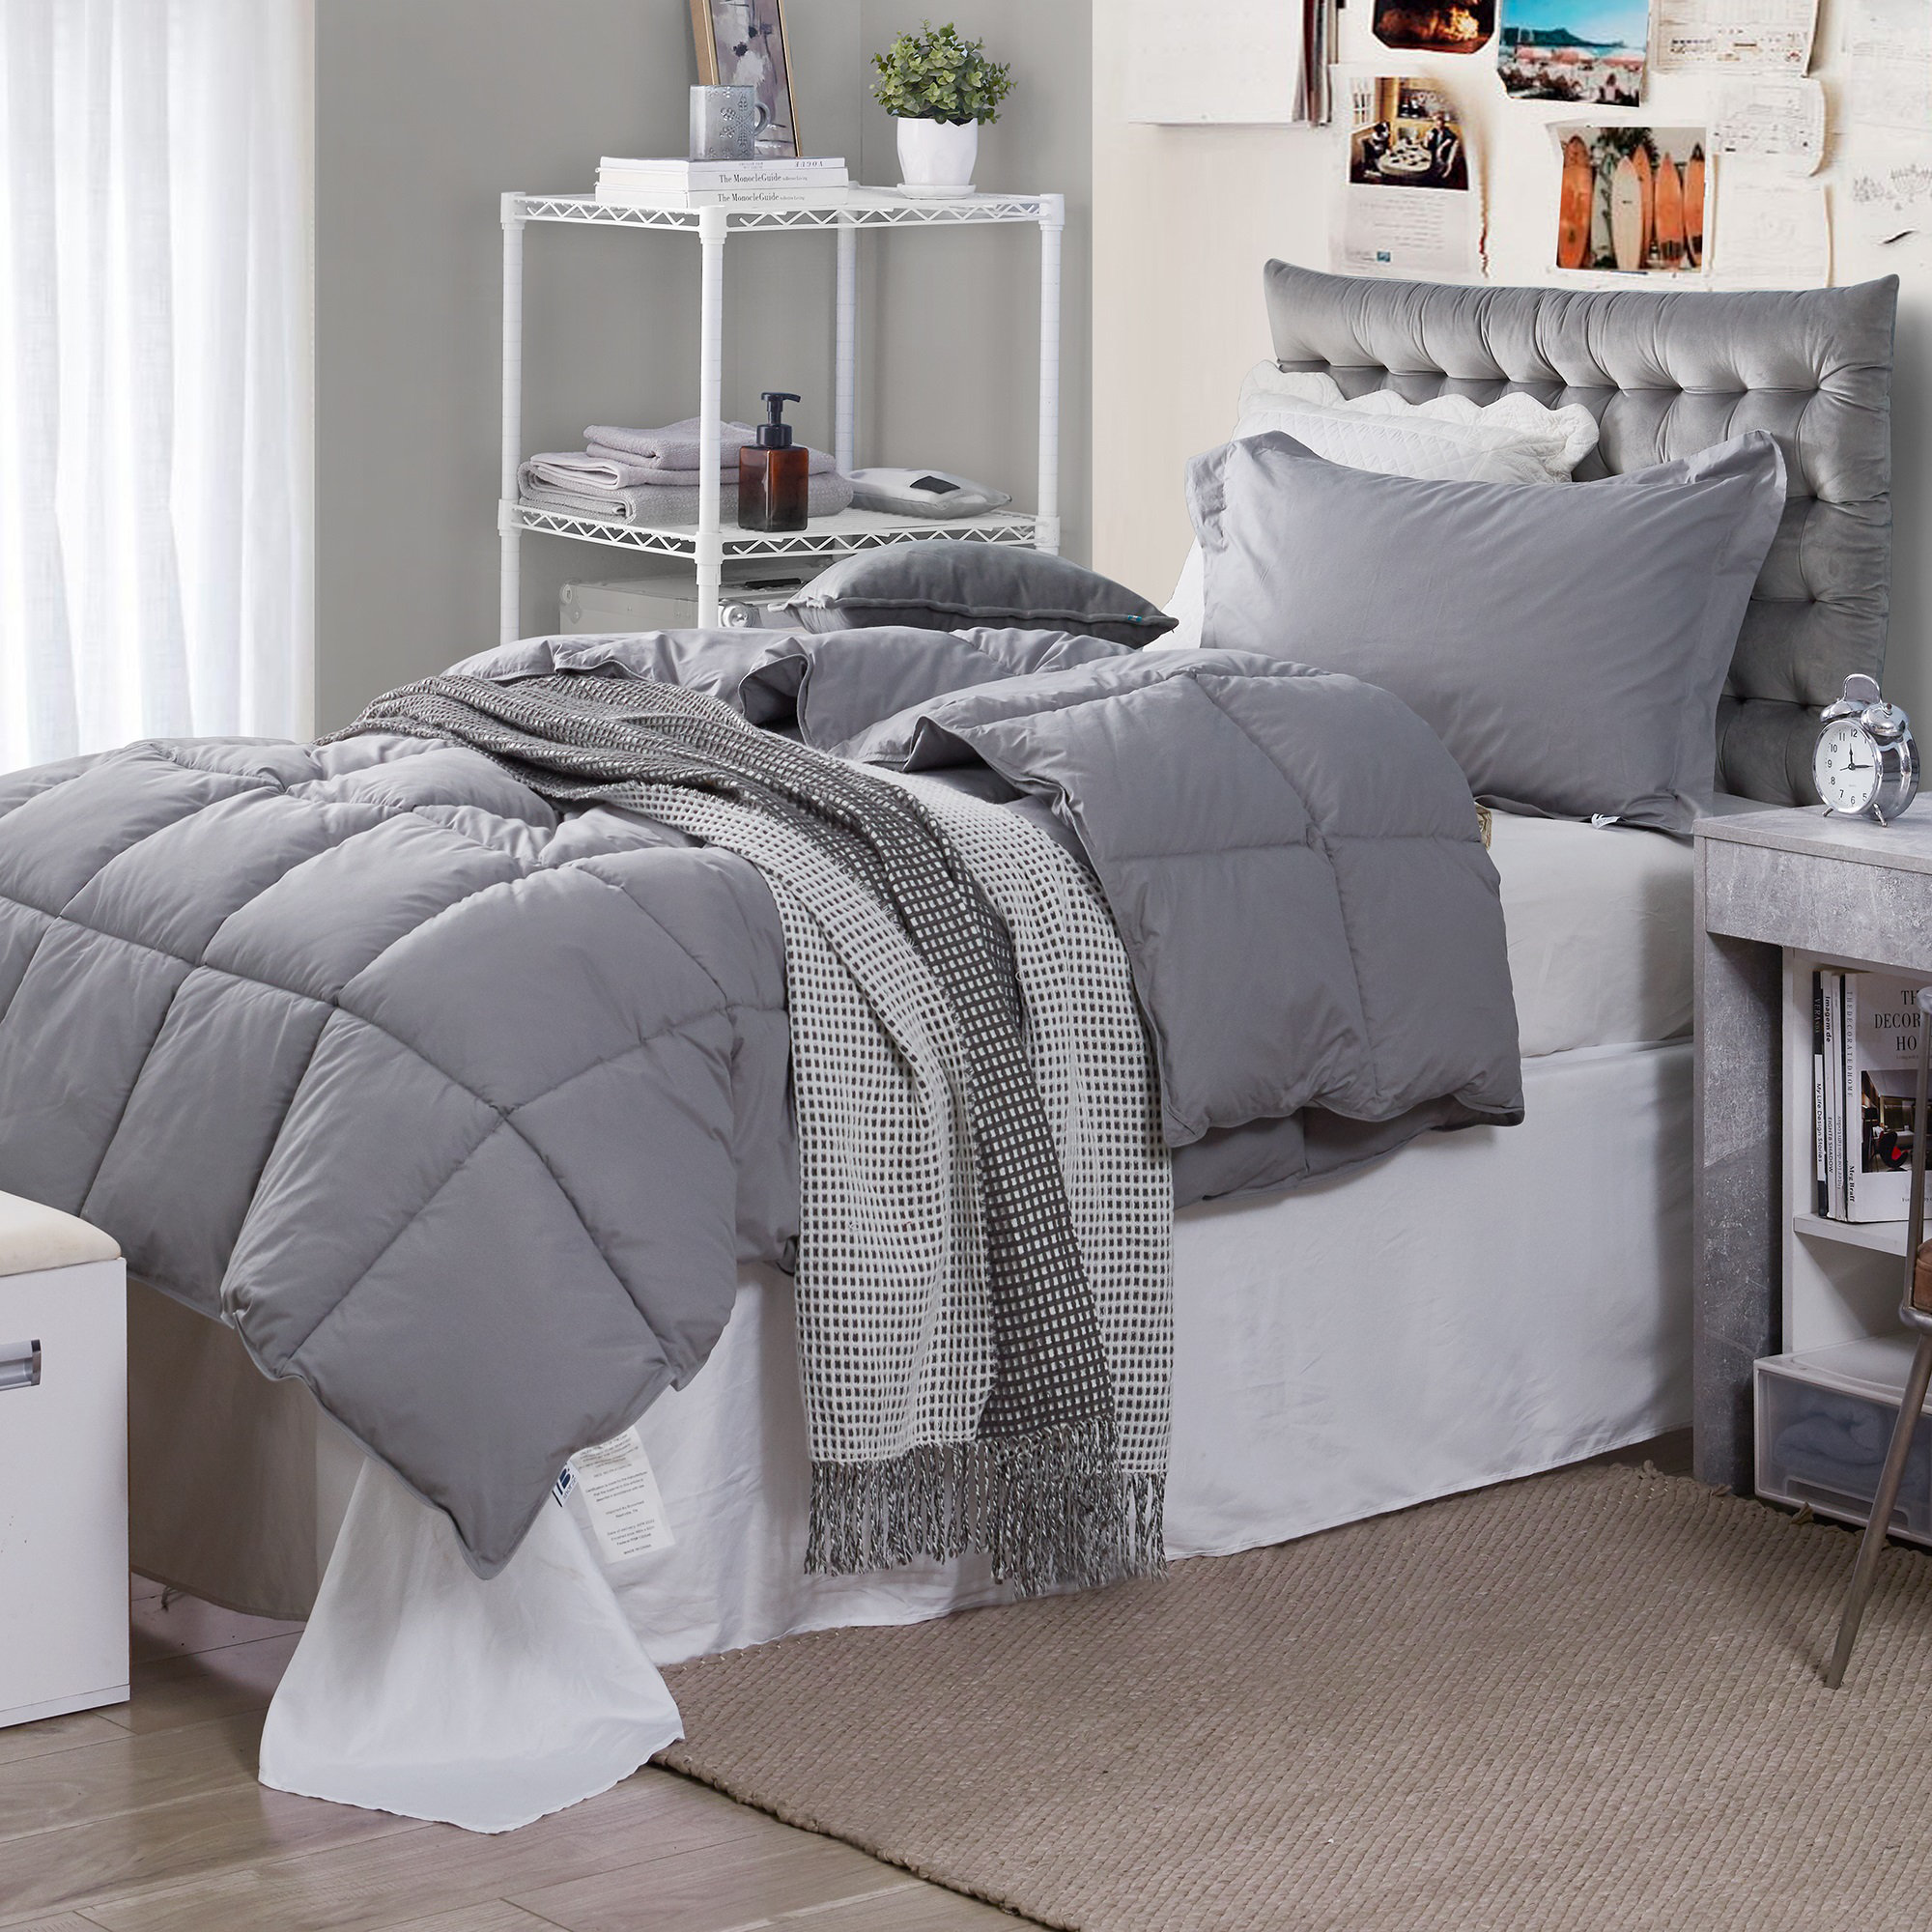 Coma Inducer Snorze Cotton Cloud Coma Inducer Oversized Comforter